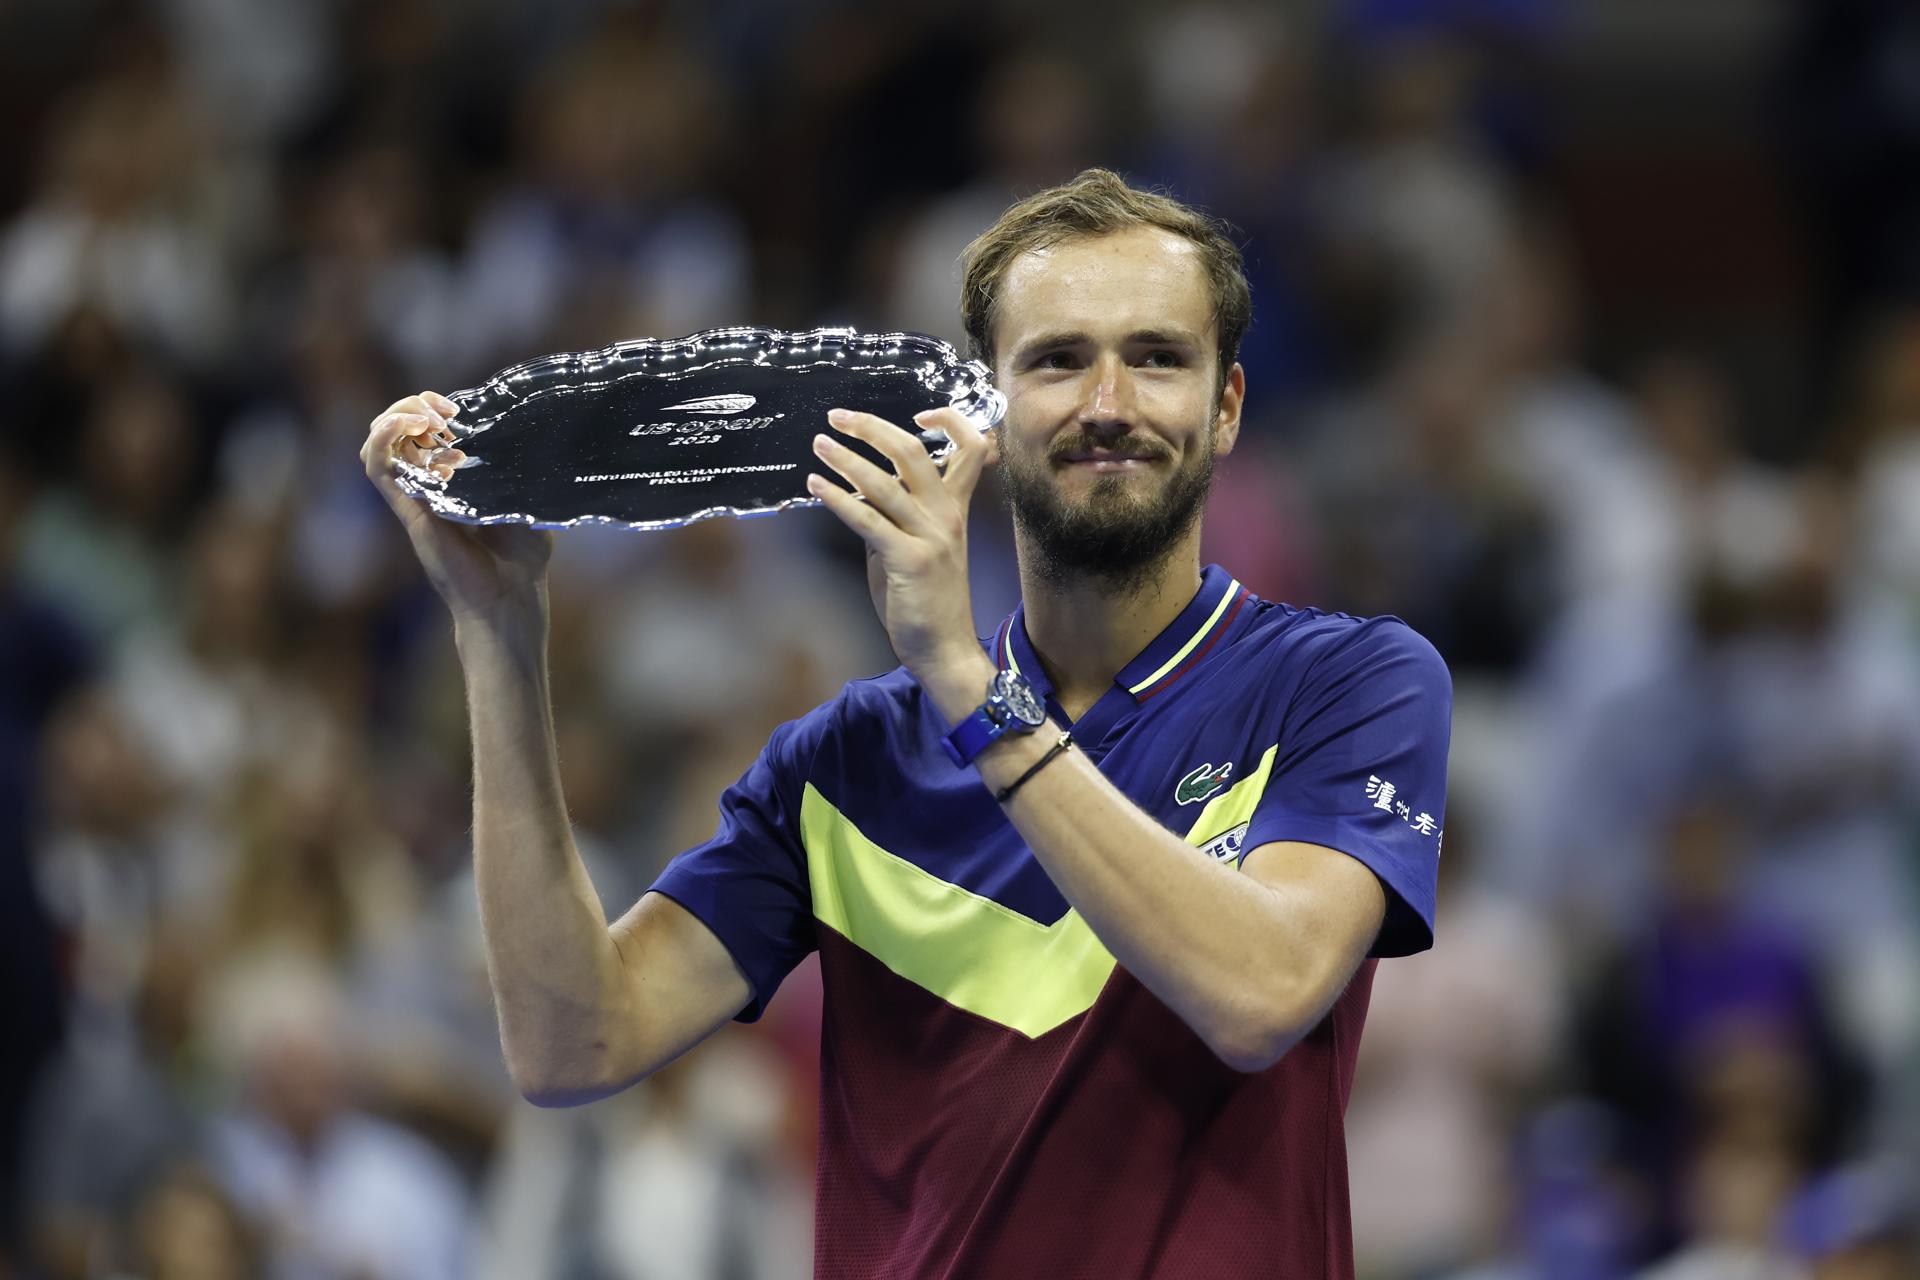 Daniil Medvedev of Russia brandishes his runner-up trophy after he was defeated by Novak Djokovic of Serbia against in their Men's Final match at the US Open Tennis Championships at the Flushing Meadows, New York, USA, 10 September 2023. EFE/EPA/JUSTIN LANE
